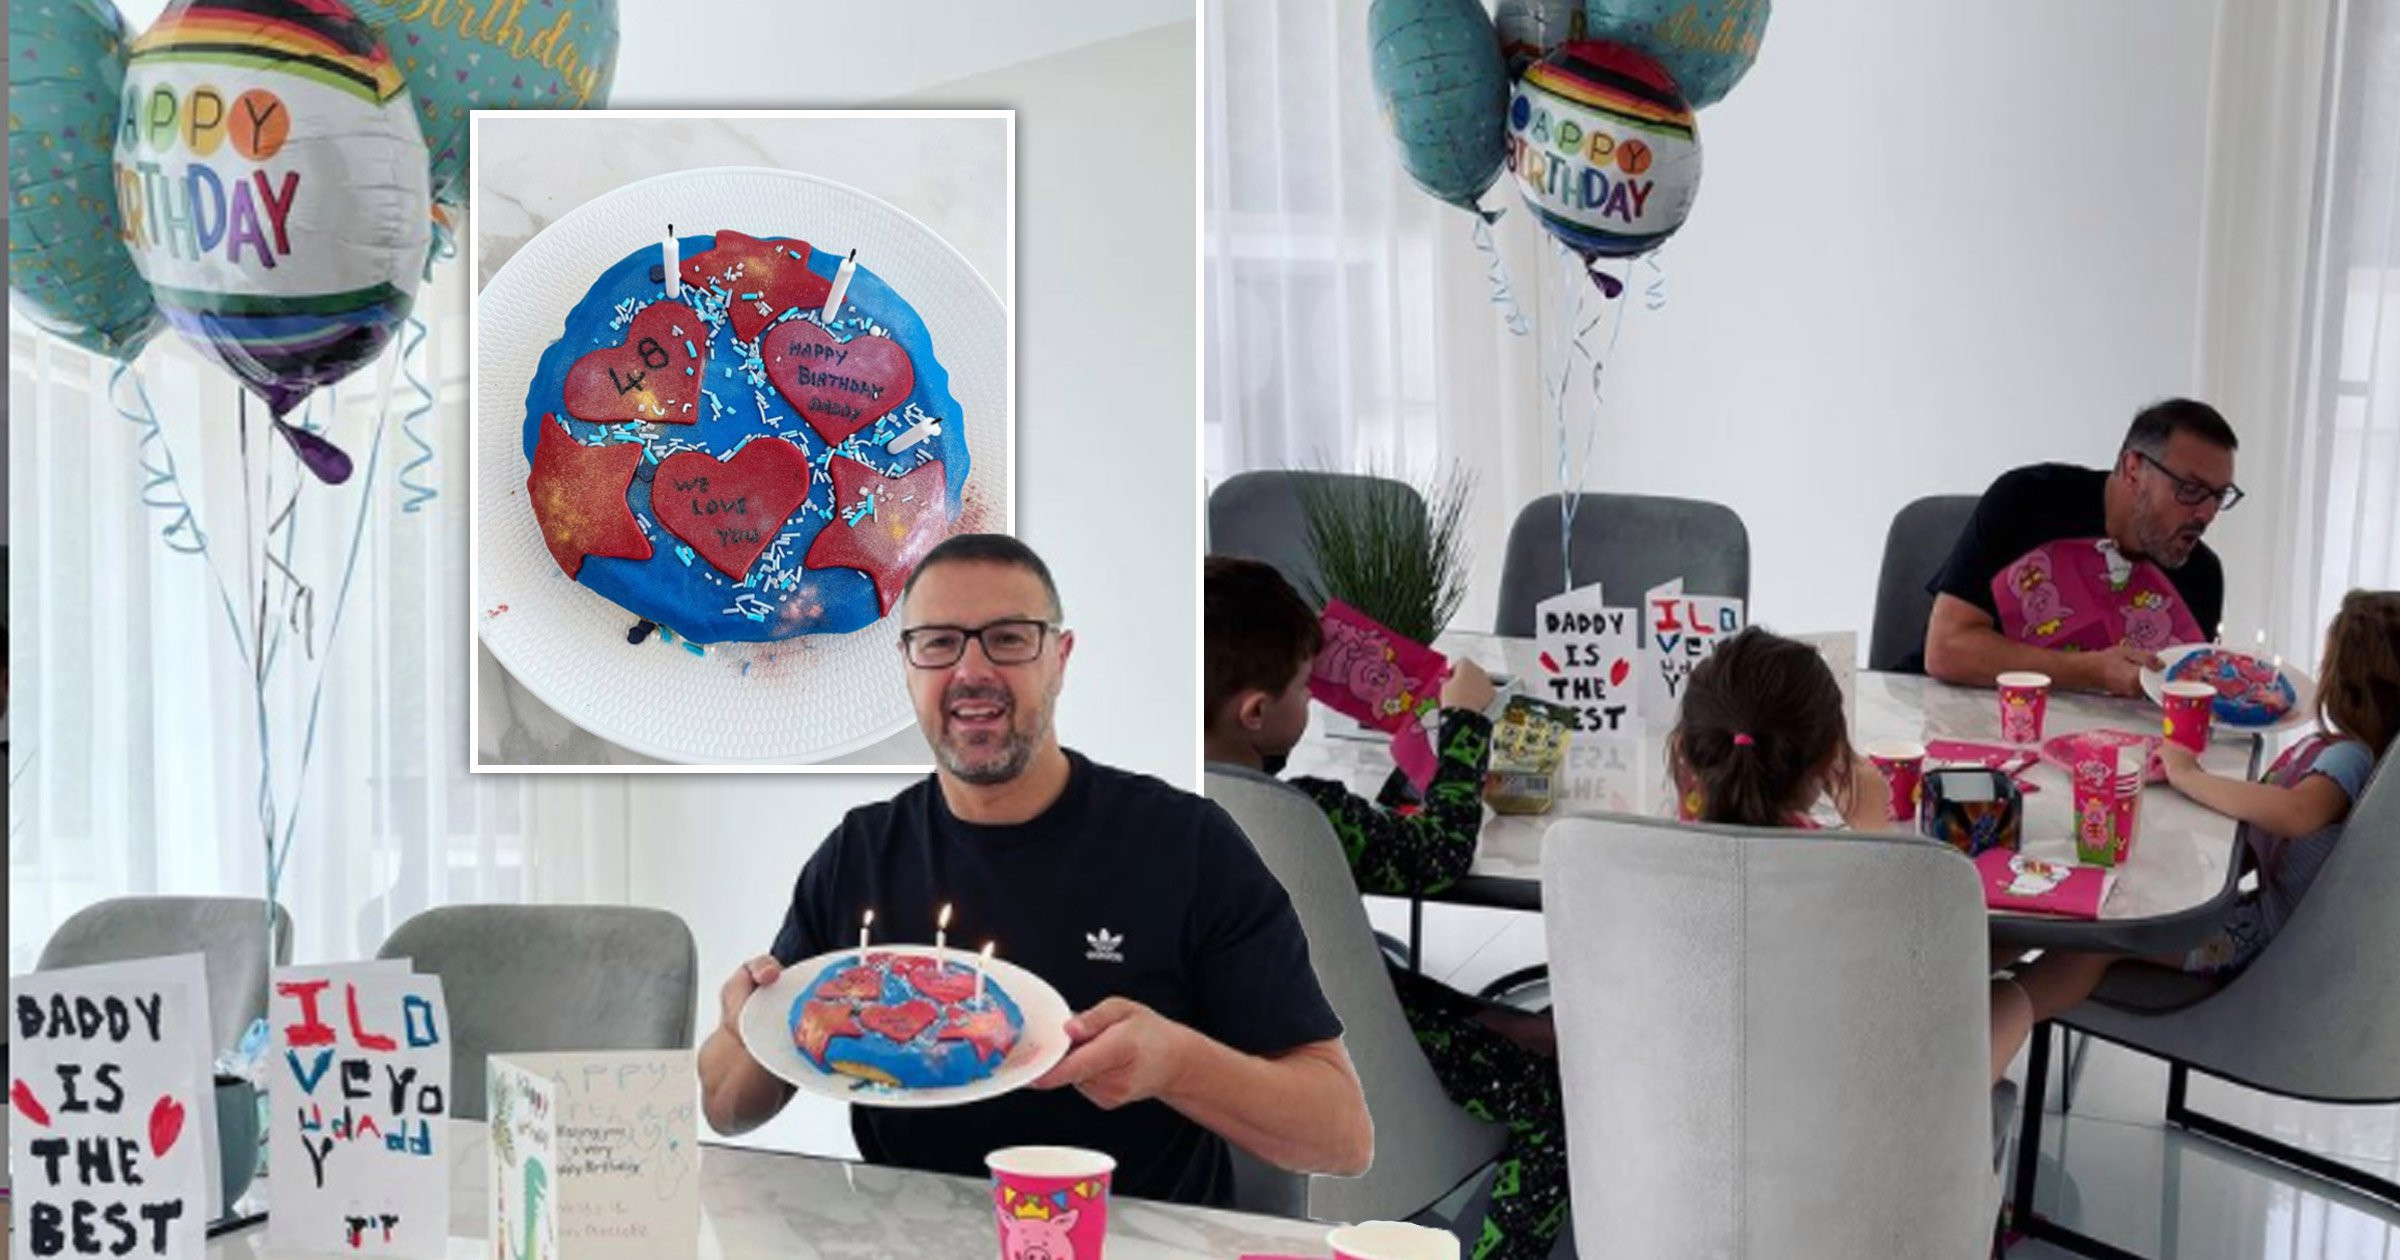 Paddy McGuinness unveils handmade cake and cards from children as he celebrates 48th birthday